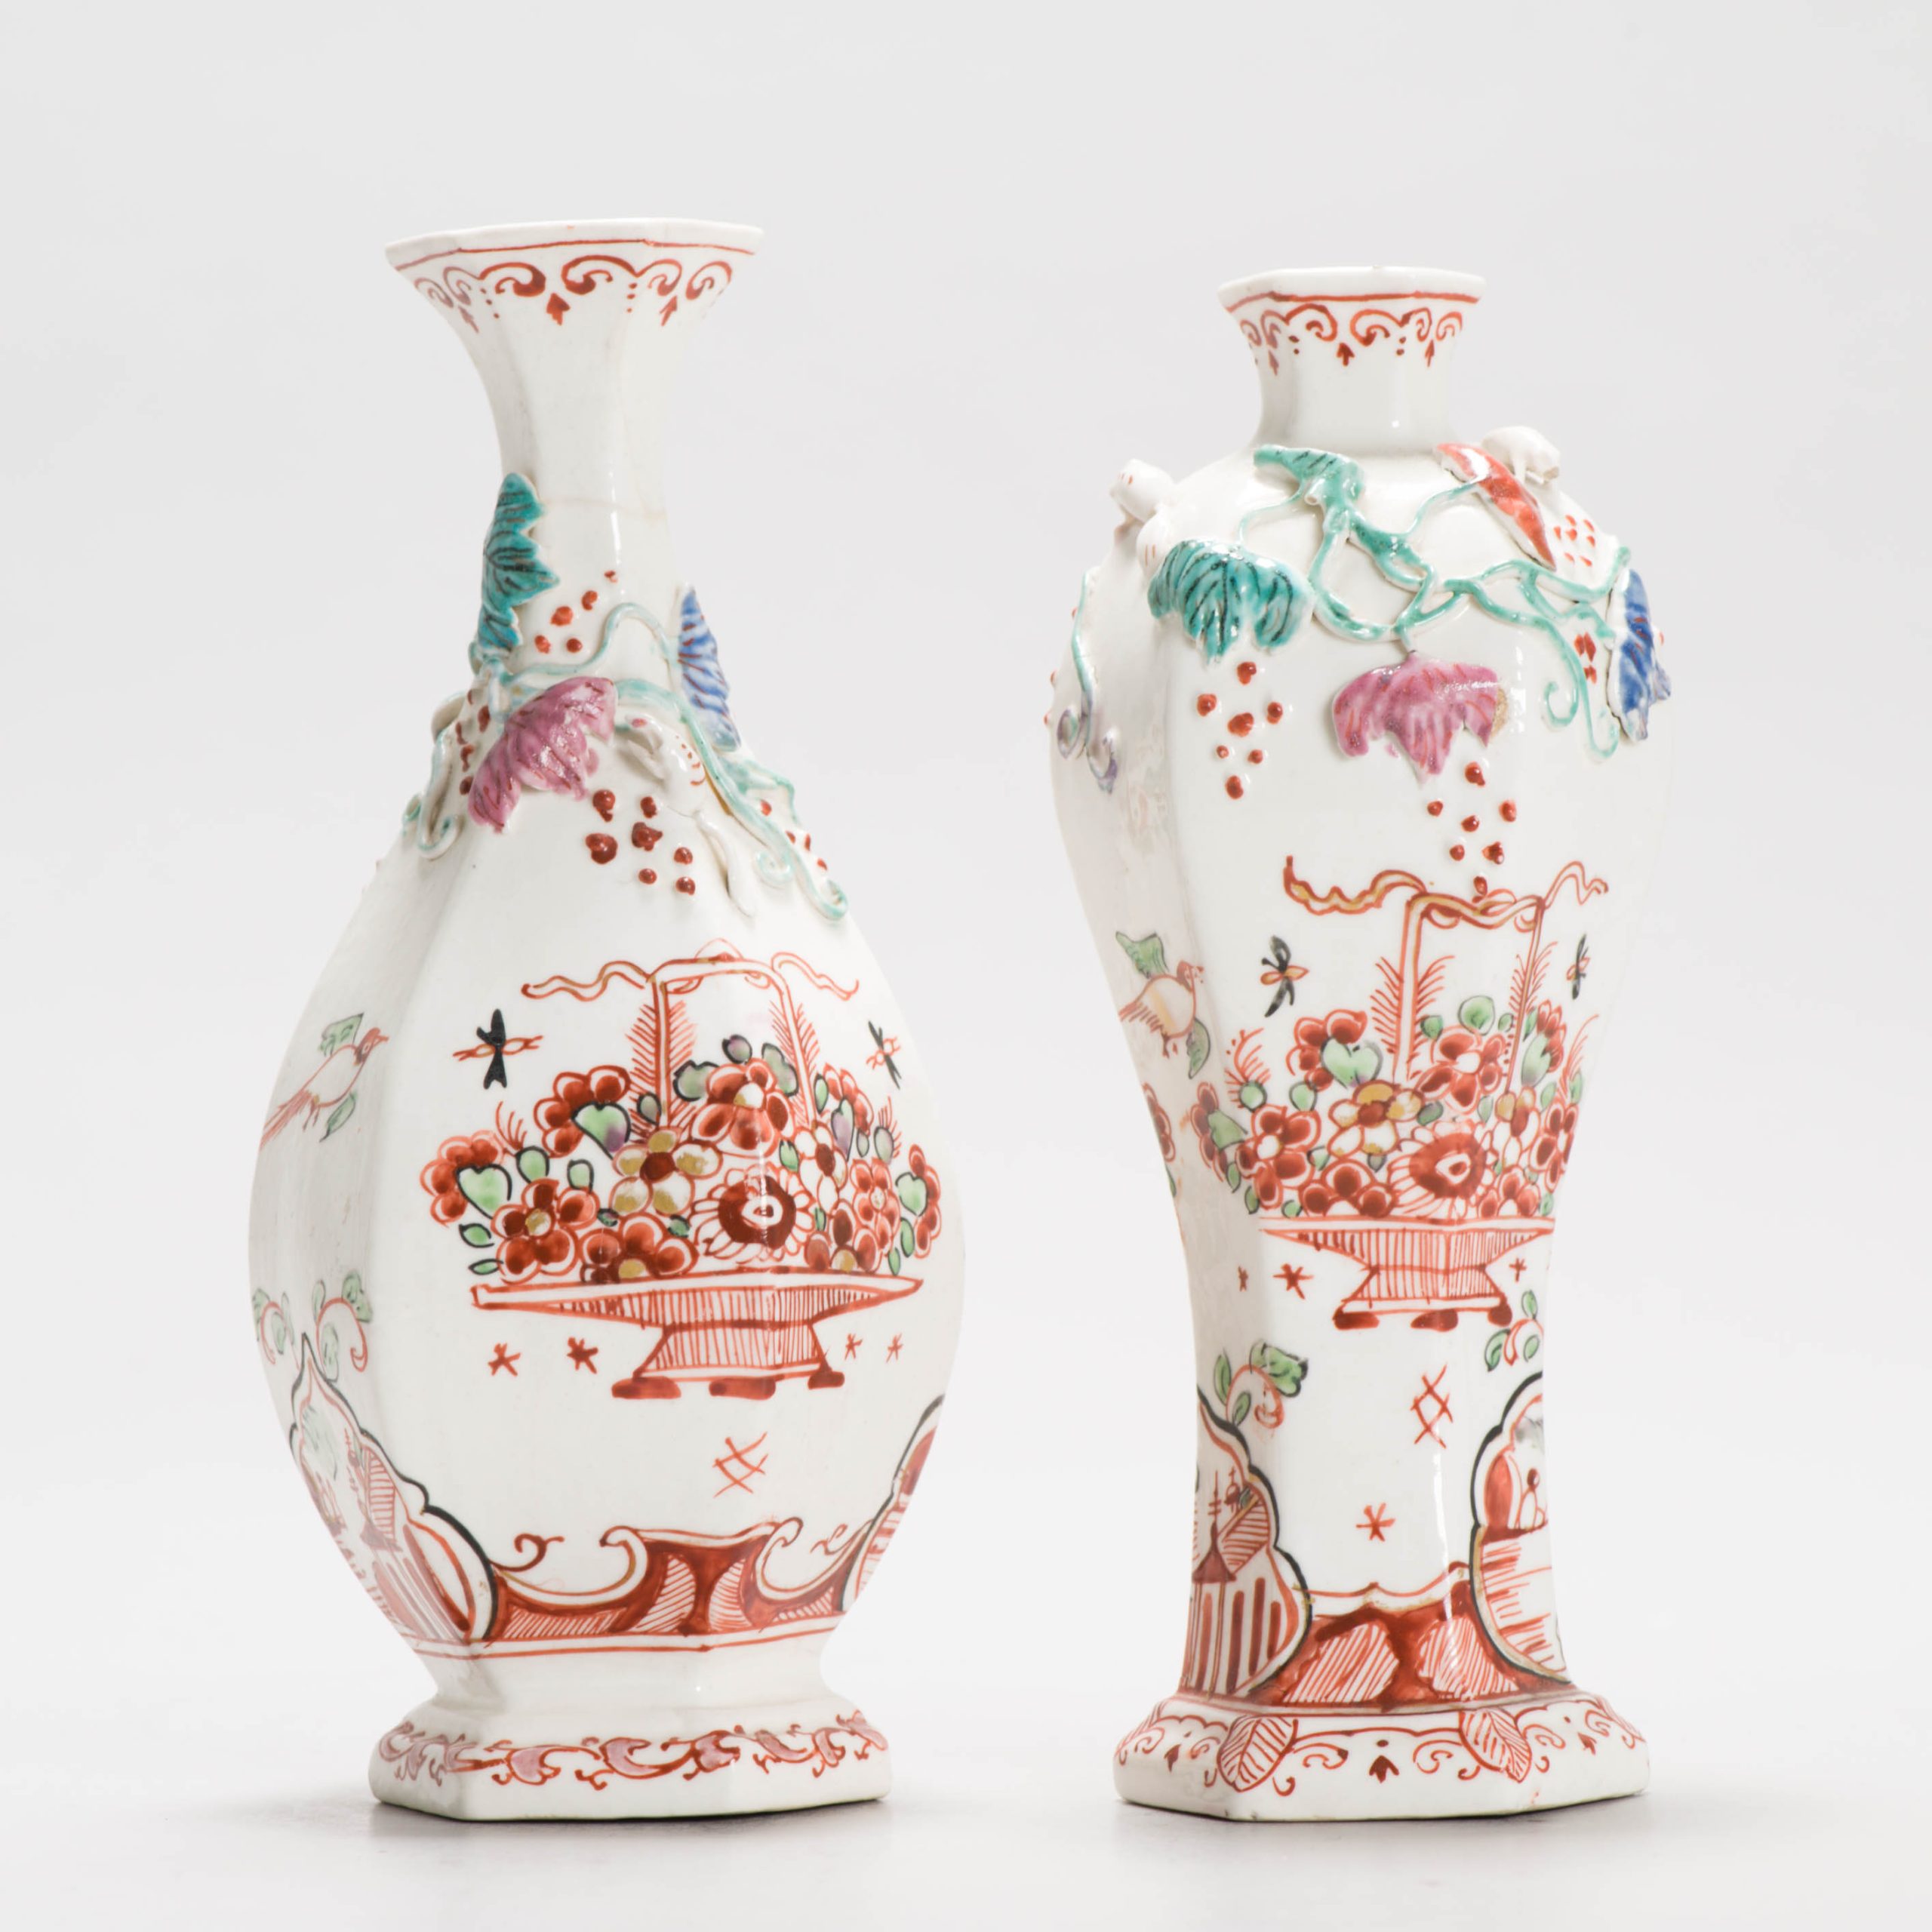 1319 & 1320 A Lovely Pair of Vases Painted in Europe on a Chinese Dehua Blanc de Chine